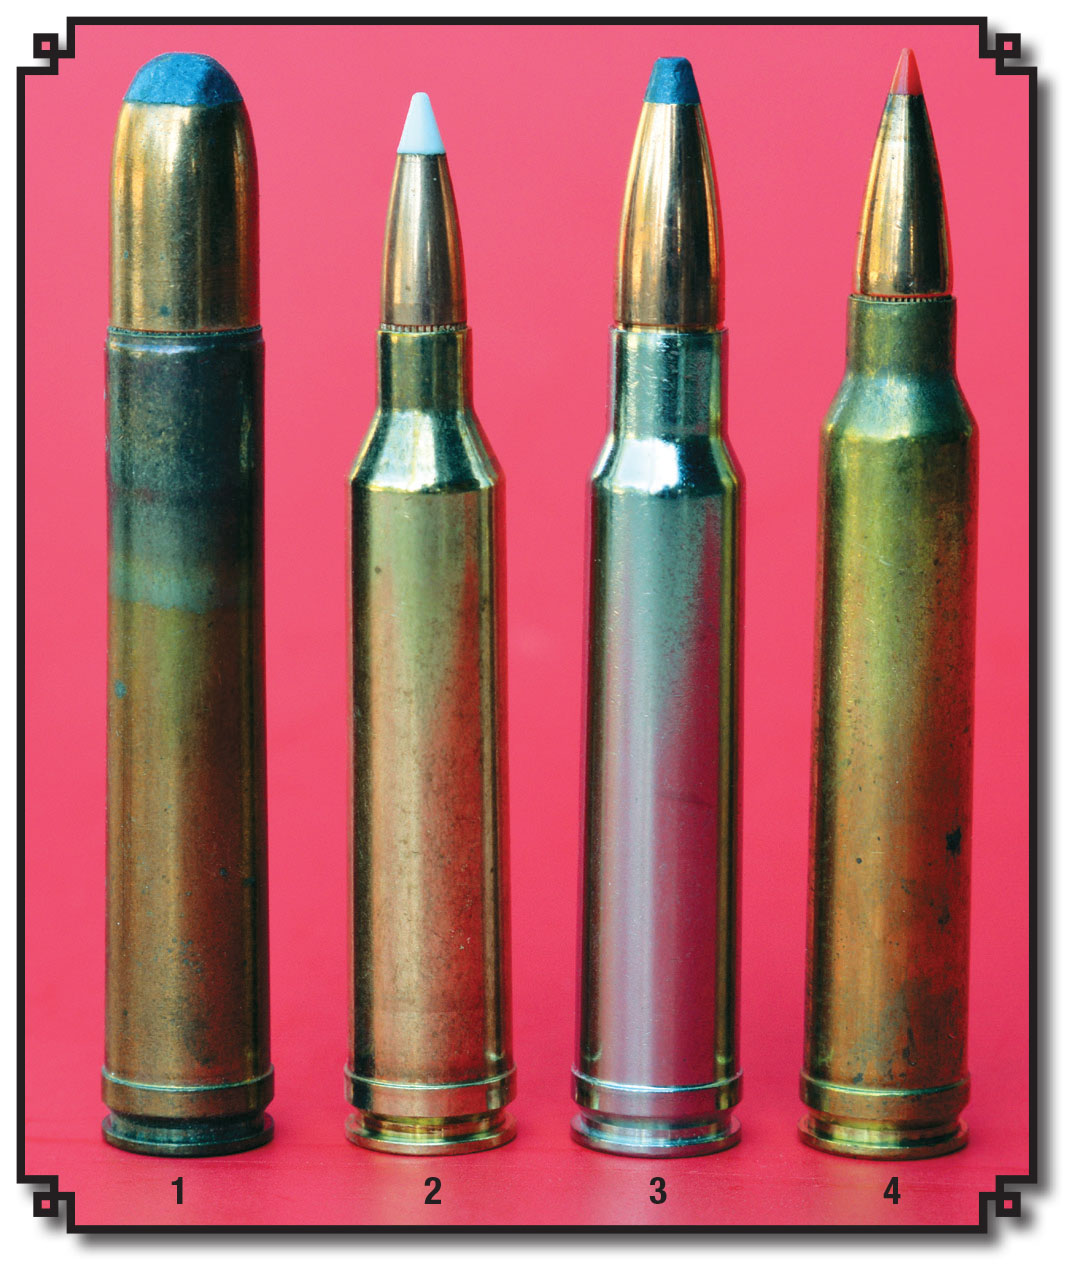 Winchester introduced a series of “short magnum” cartridges that began with the (1) .458 in 1956, (2) .264 in 1959, (3) .338 in 1958 and the (4) .300 Winchester Magnum in 1963.